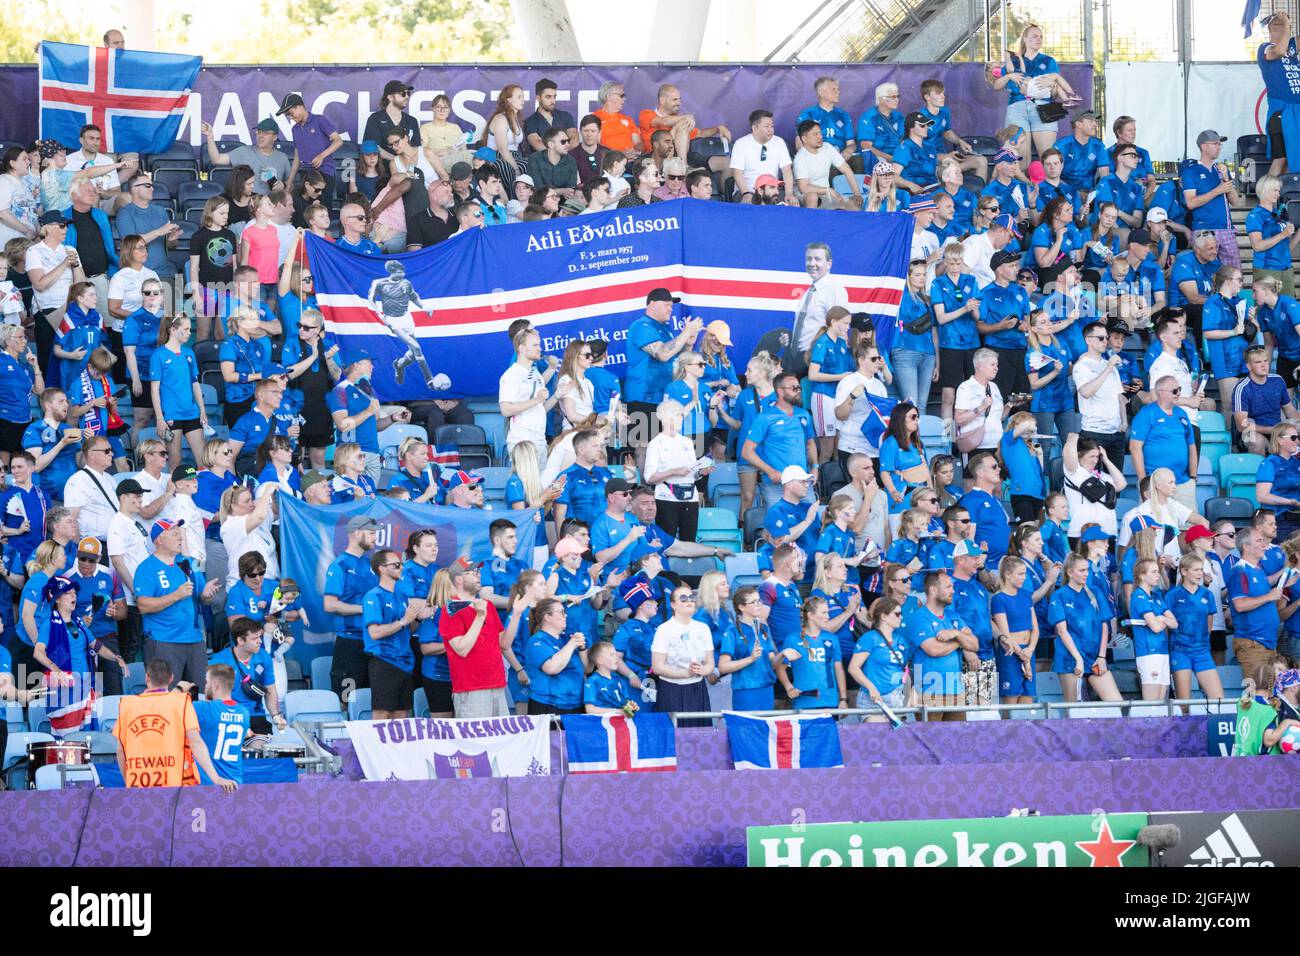 Manchester, UK. 10th July, 2022. Manchester, England, July 10th 2022: Iceland fans raise a banner to Atli Edvaldsson during the UEFA Womens Euro 2022 group D football match between Belgium and Iceland at Manchester City Academy Stadium in Manchester, England. (Liam Asman /Womens Football Magazine /SPP) Credit: SPP Sport Press Photo. /Alamy Live News Stock Photo